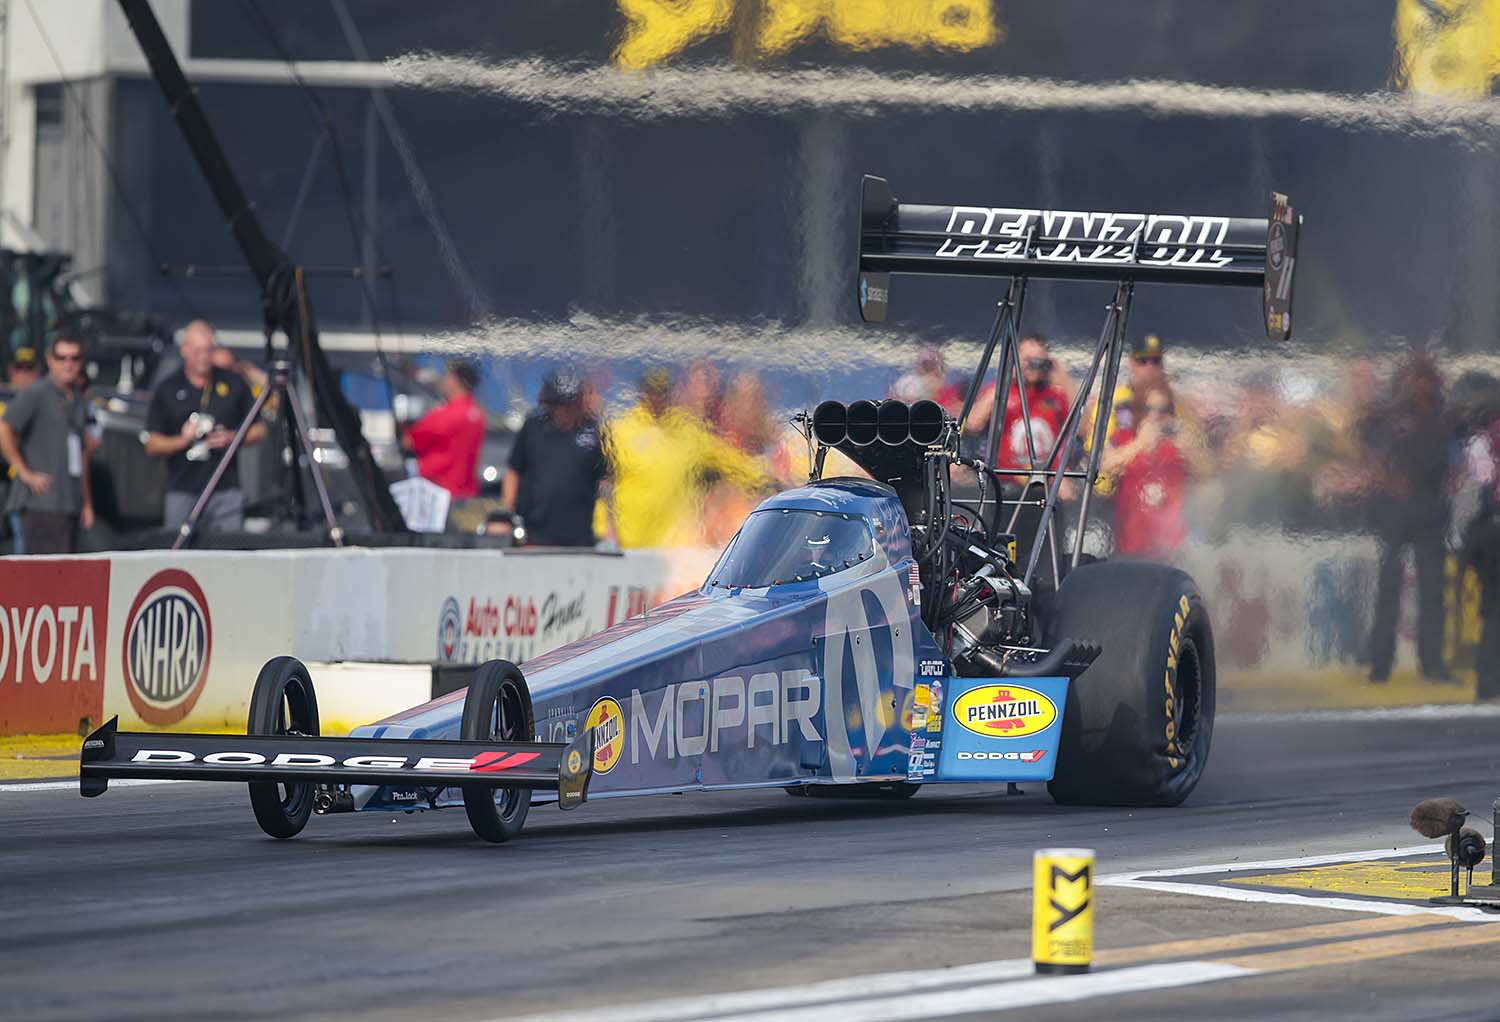 Leah rocketed to the head of the Top Fuel category by running low E.T. of Q2